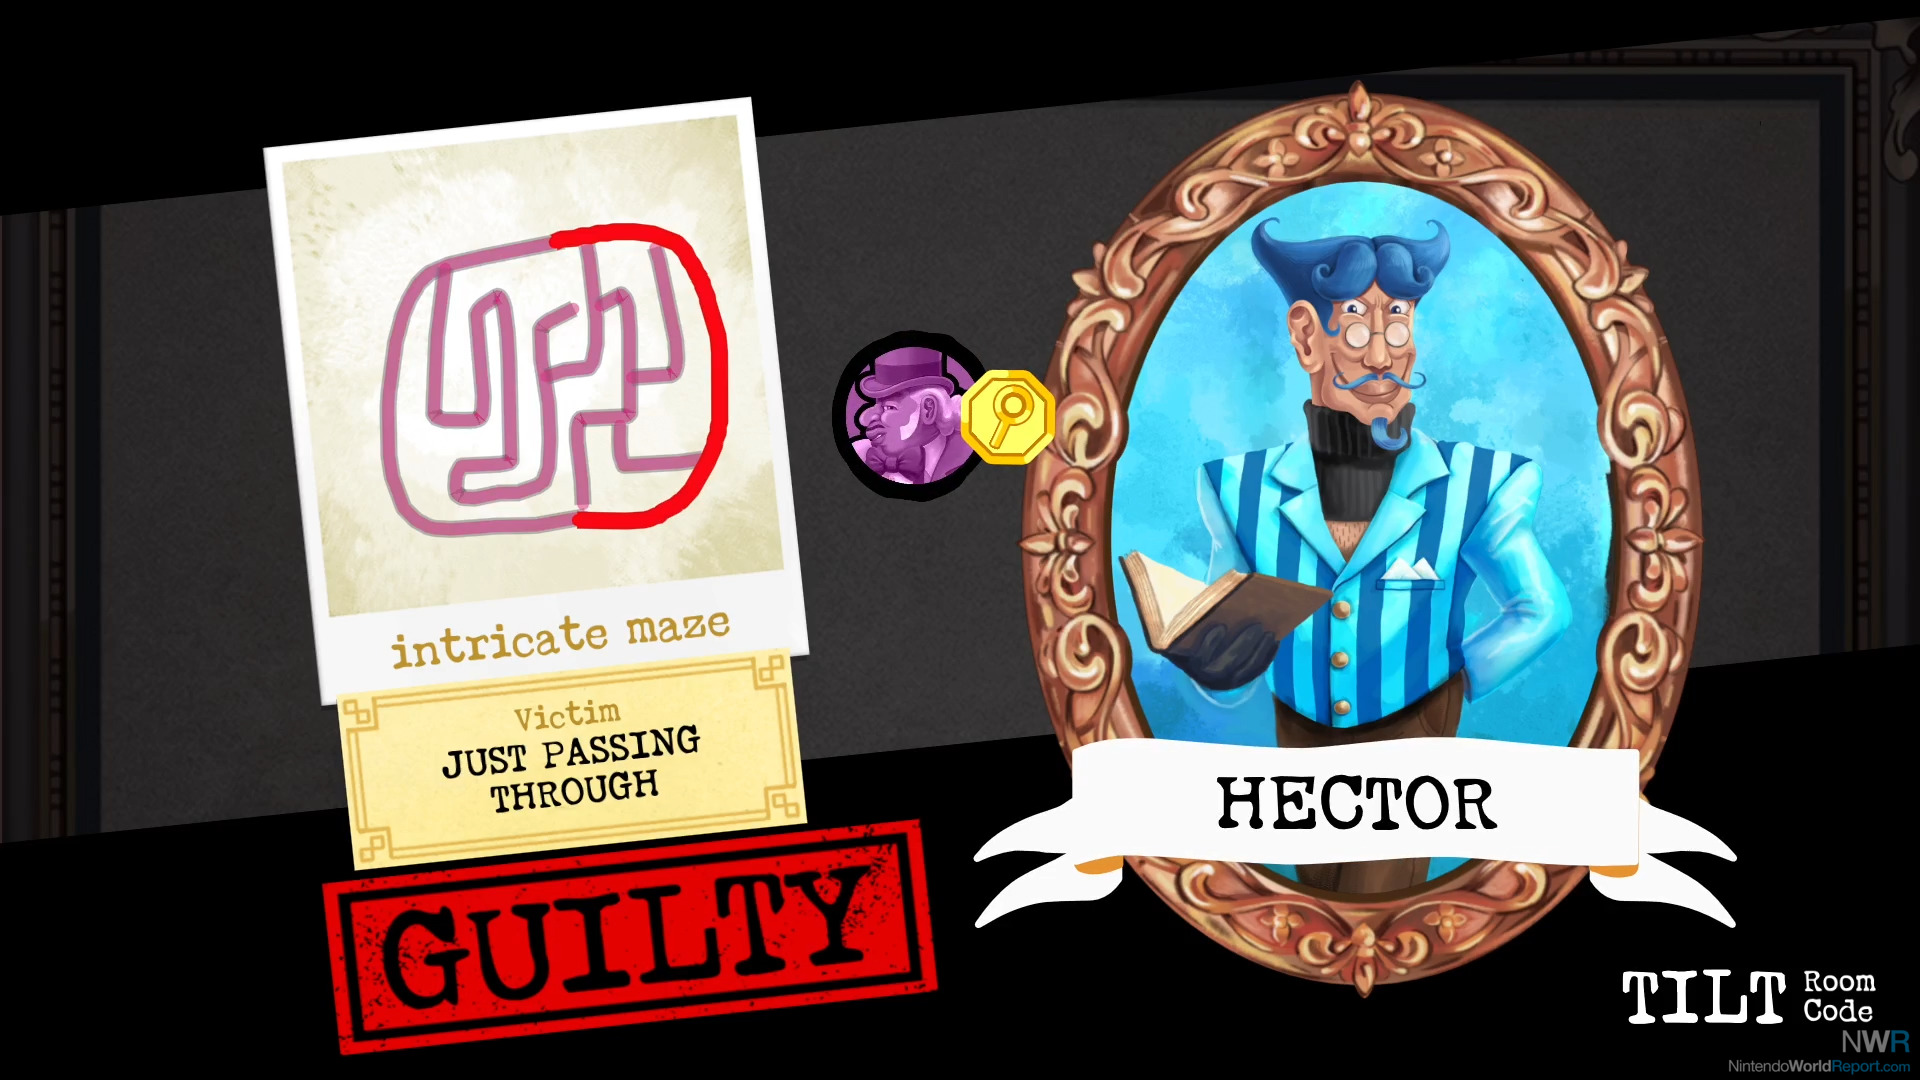 which jackbox games are family friendly